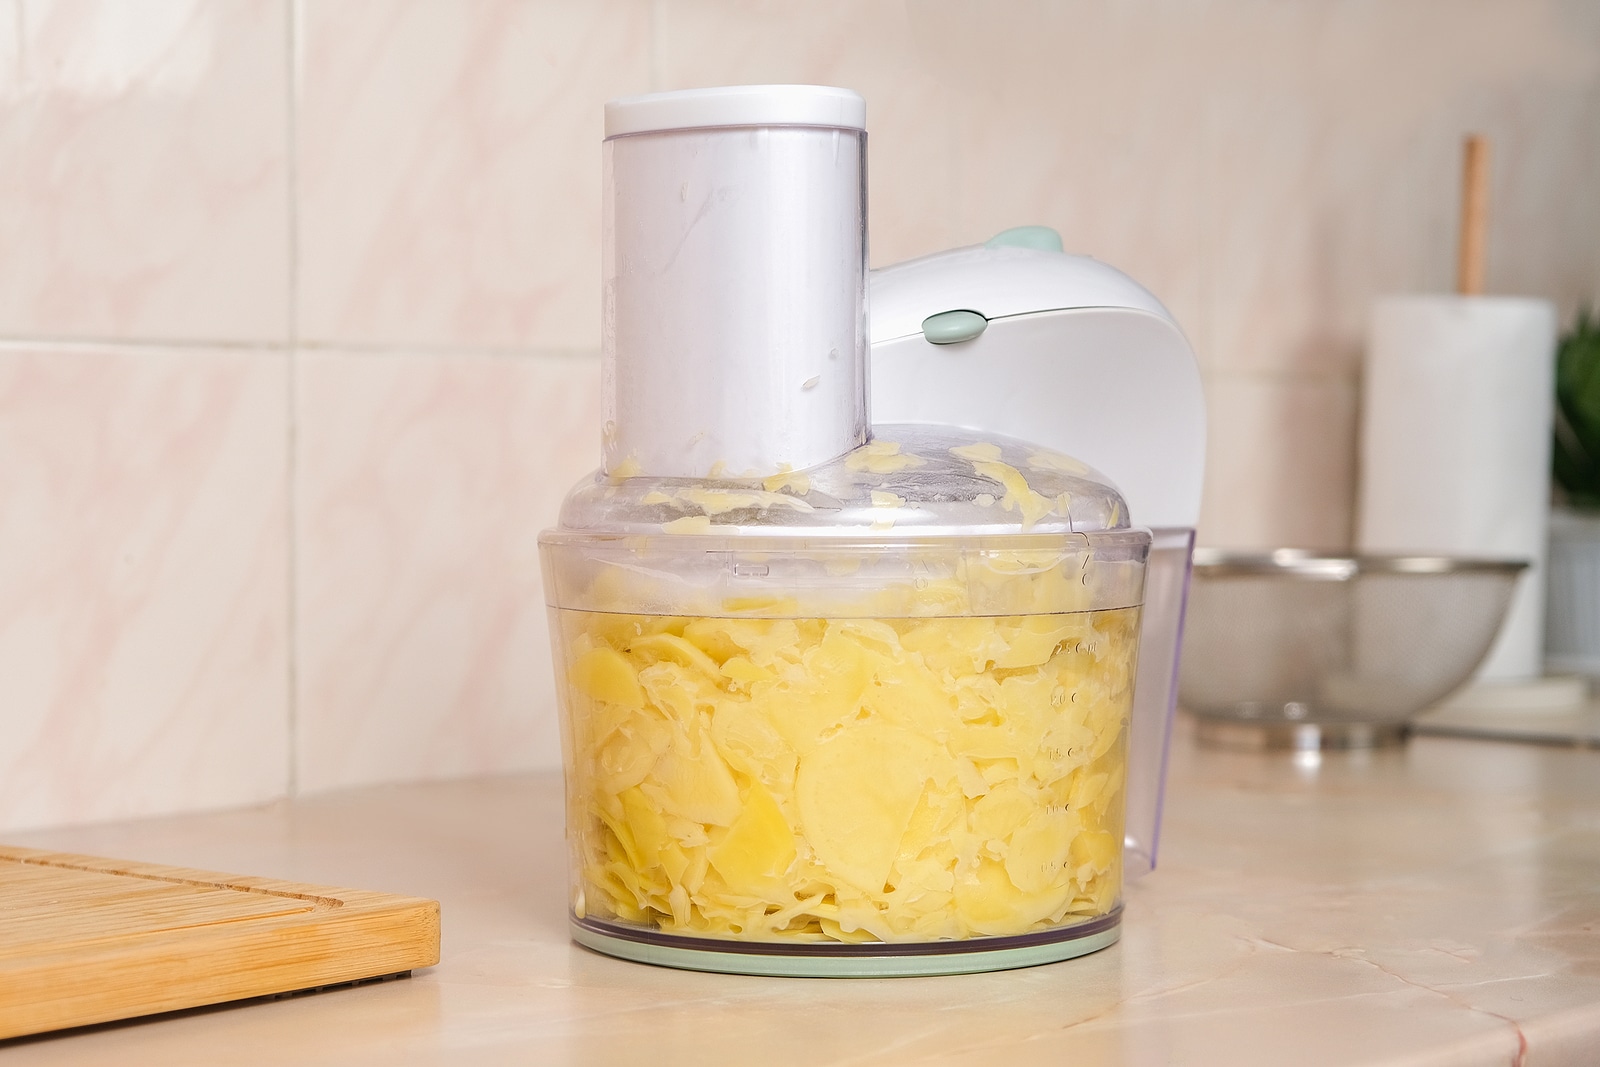 Potatoes Cut Into Thin Slices In Food Processor Preparation Pot